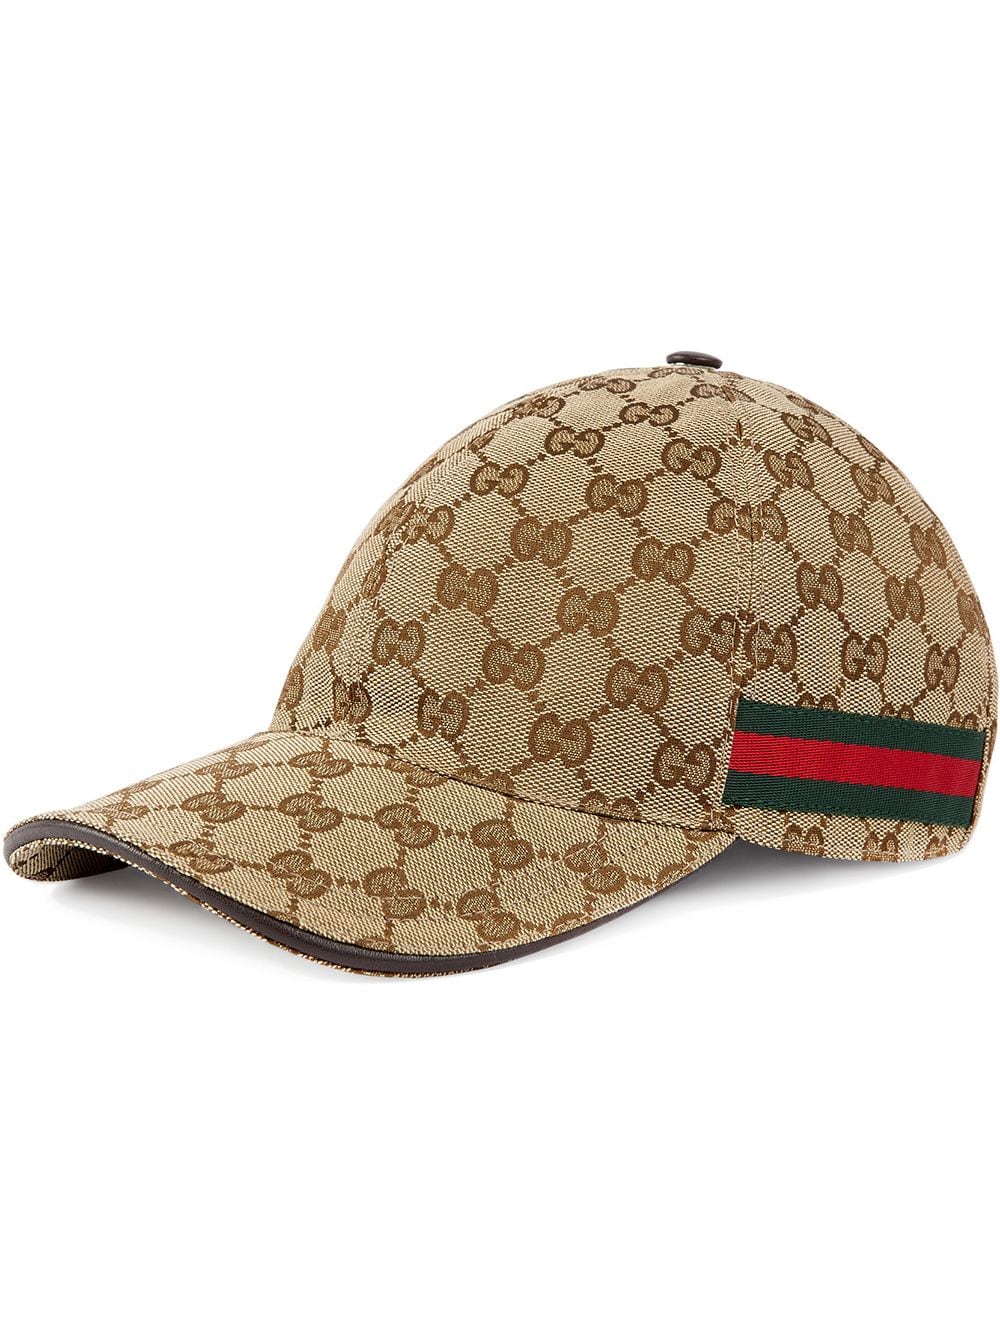 Spild Bil udtale The Exact Gucci Baseball Caps That Jinkee Pacquiao Works Out In